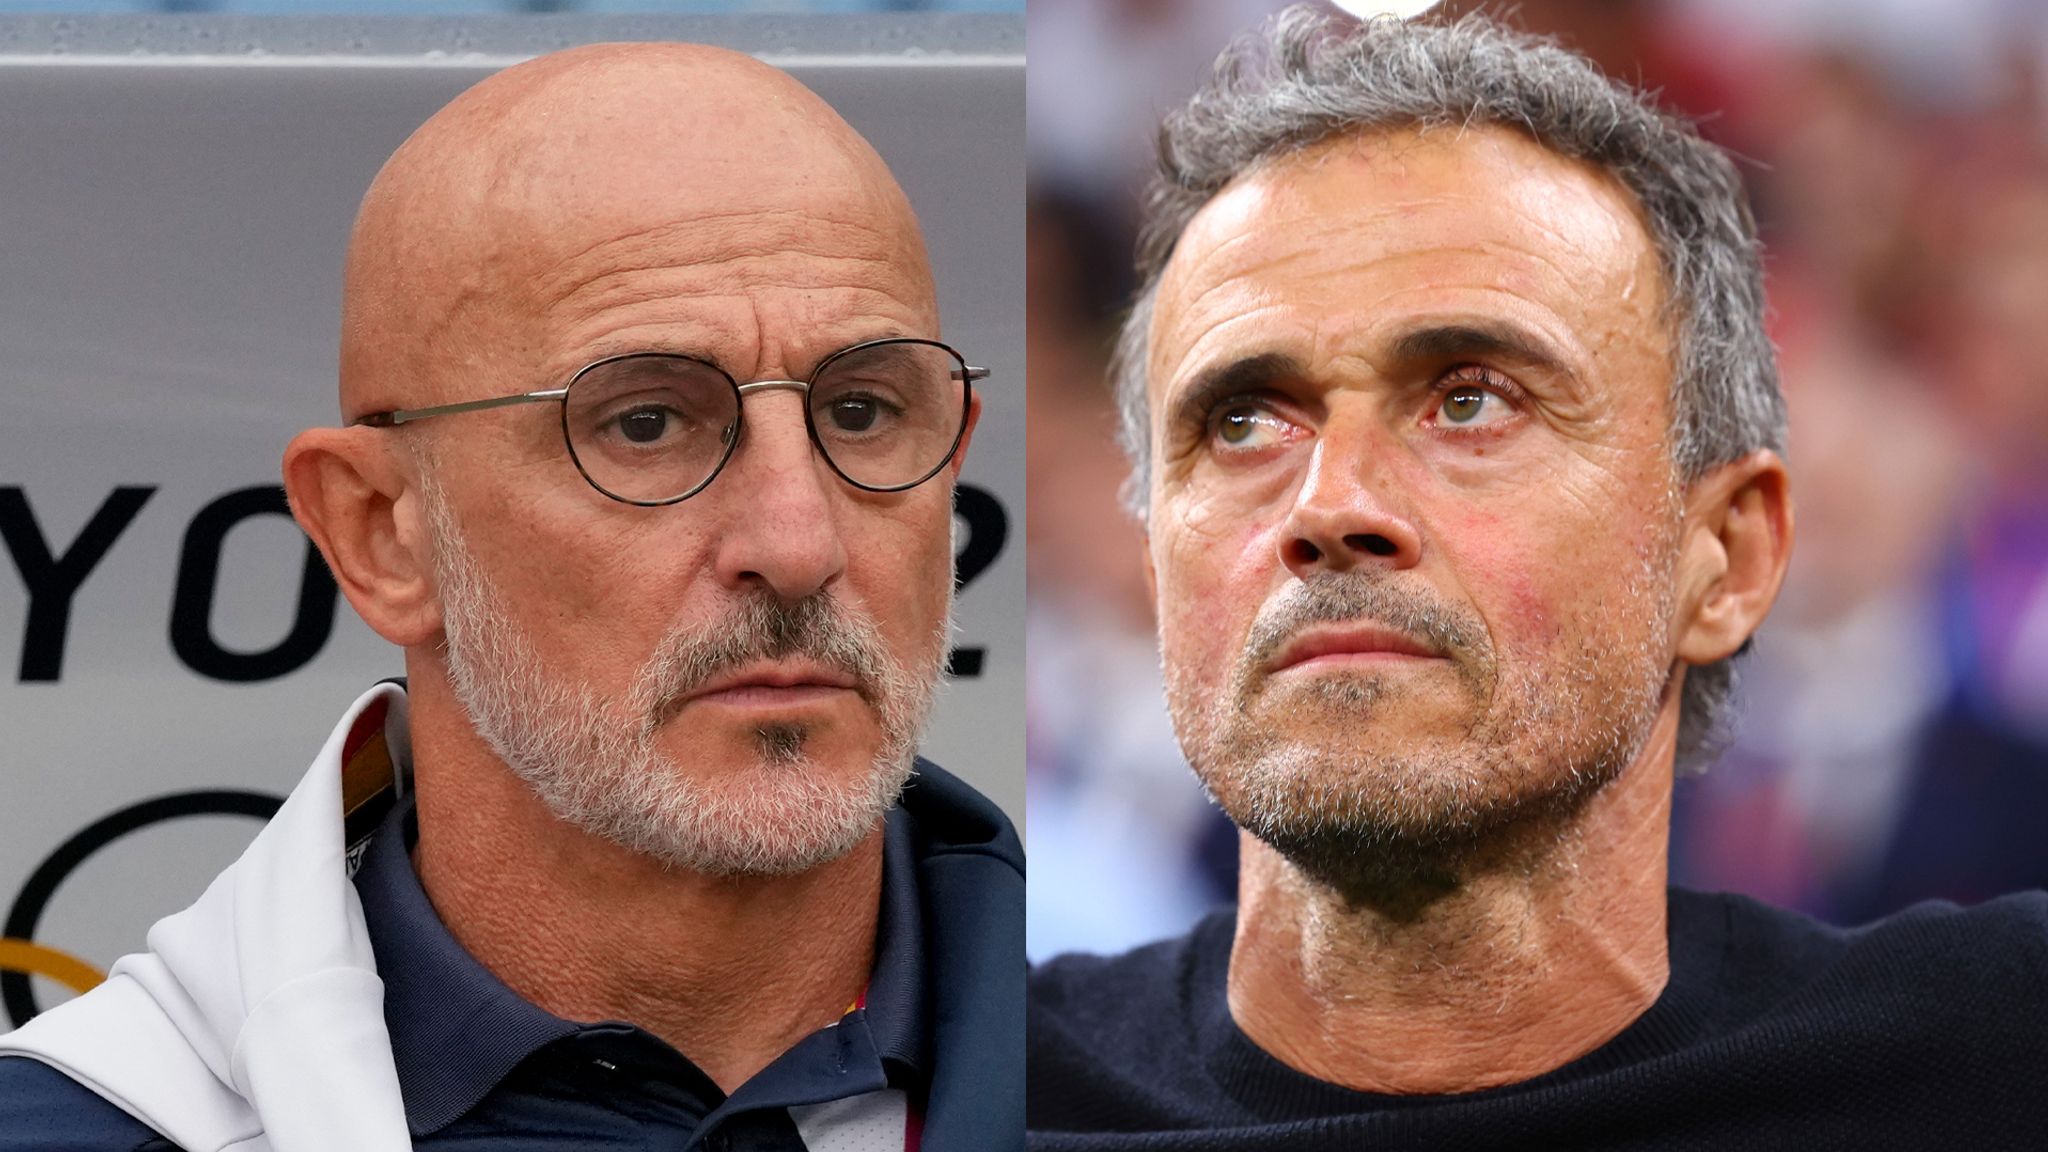 Luis Enrique: Spain head coach leaves role after World Cup exit and  replaced by U21 boss Luis de la Fuente | Football News | Sky Sports